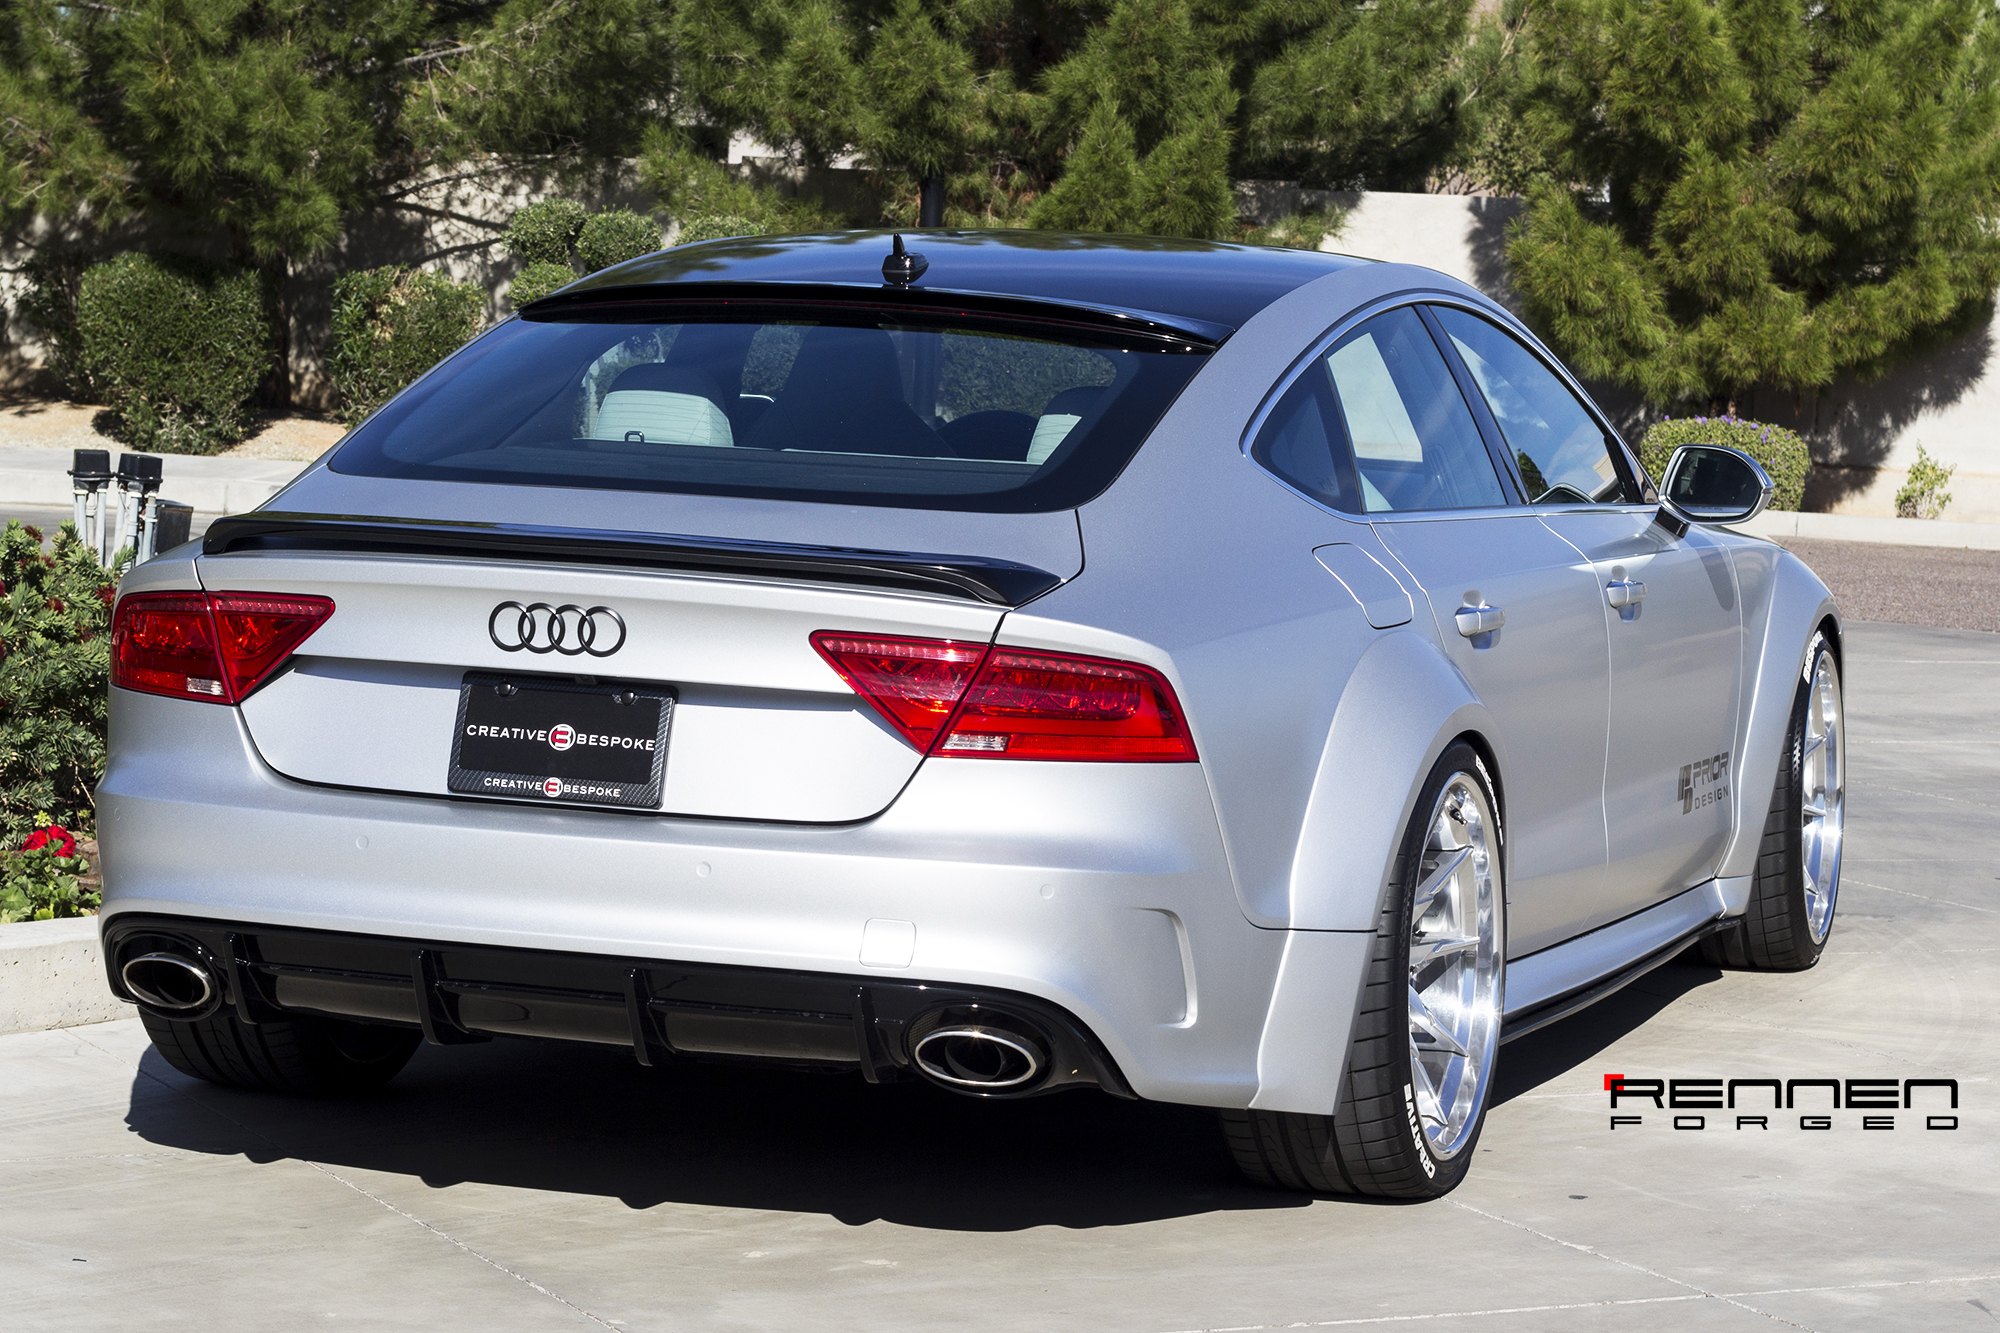 Silver Audi A7 with Rear Lip Spoiler - Photo by Rennen International